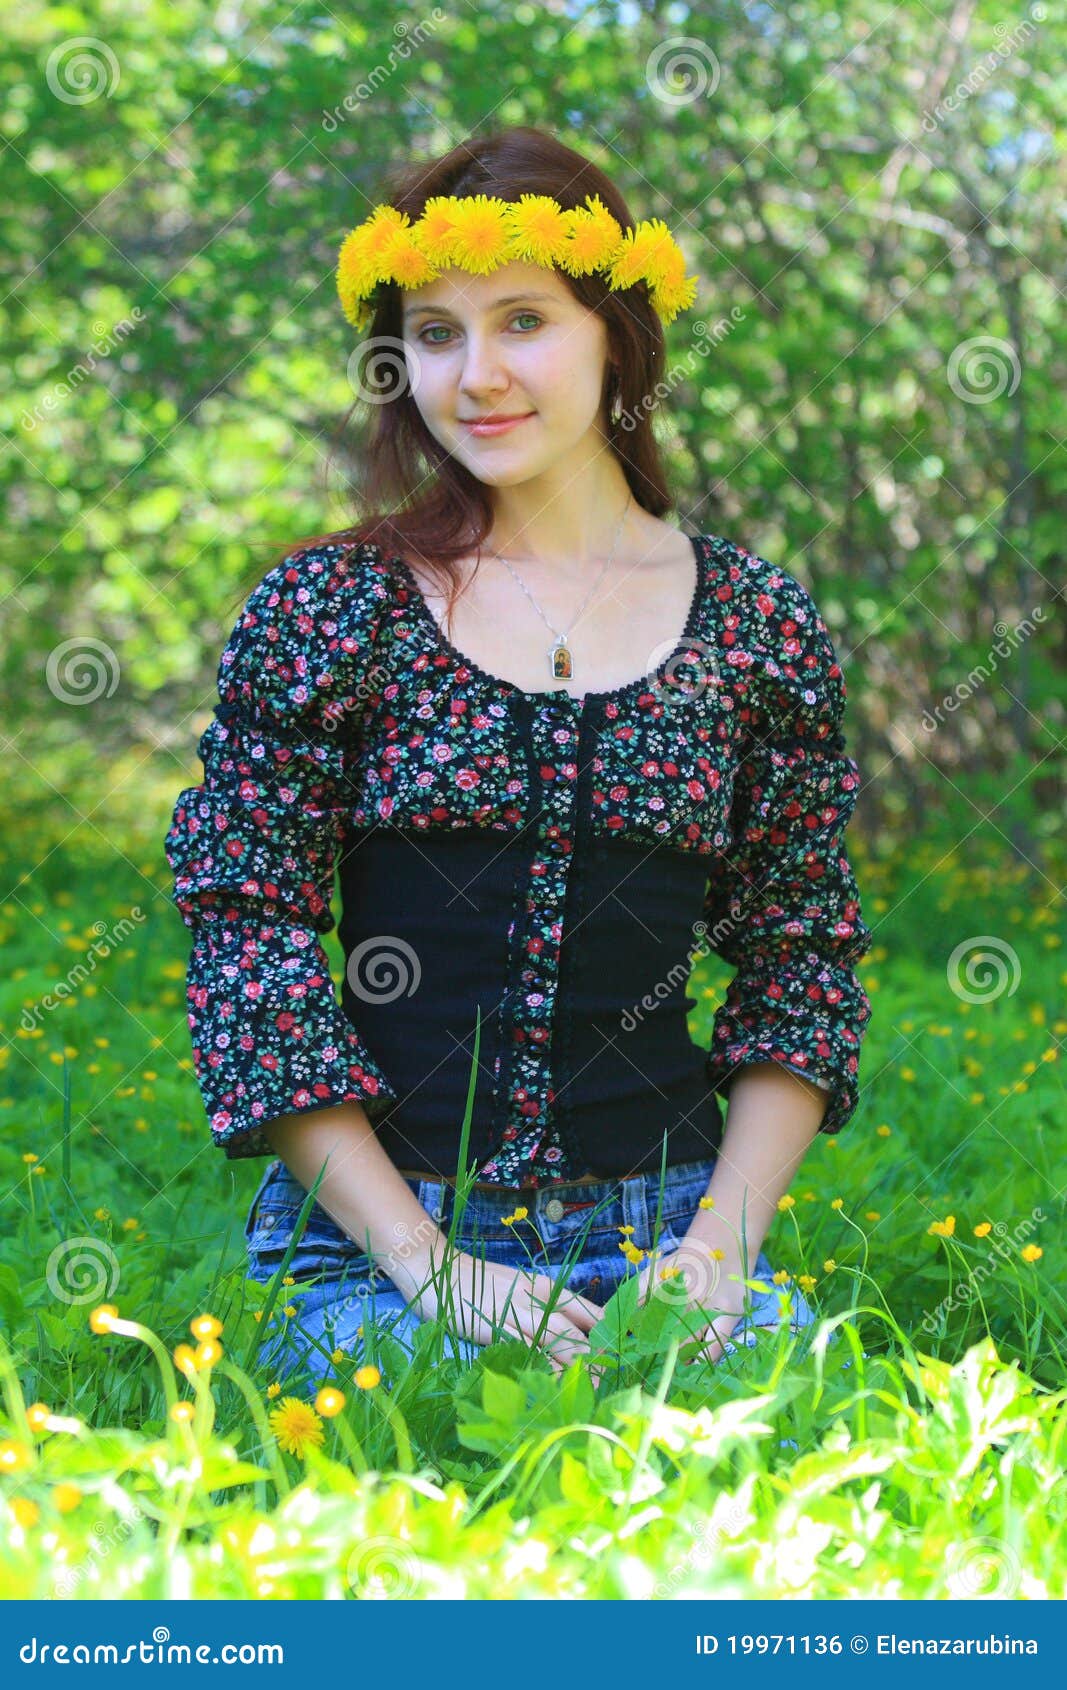 Young Russian Woman Wearing A Flower Crown Royalty Free Stock Image ...